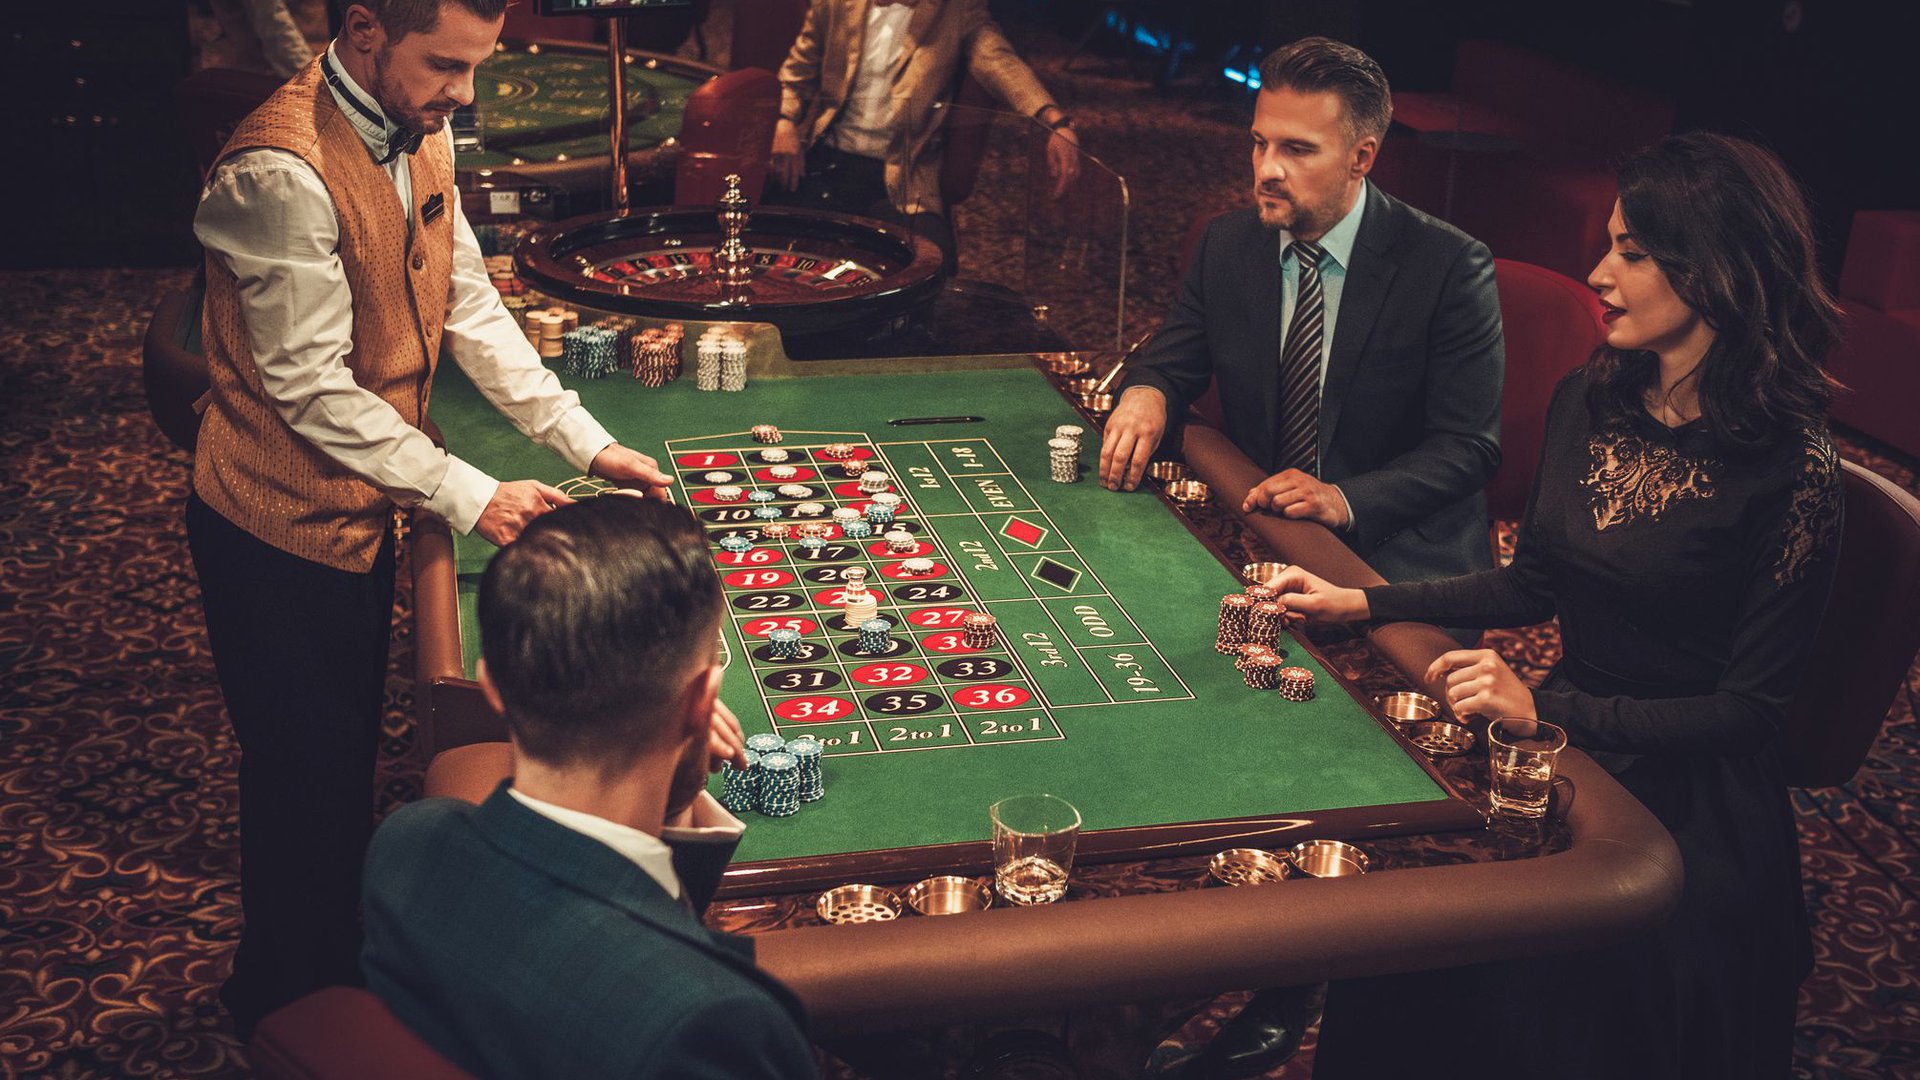 Betting on pleasure: Top 6 hotels in Tbilisi with the best casinos